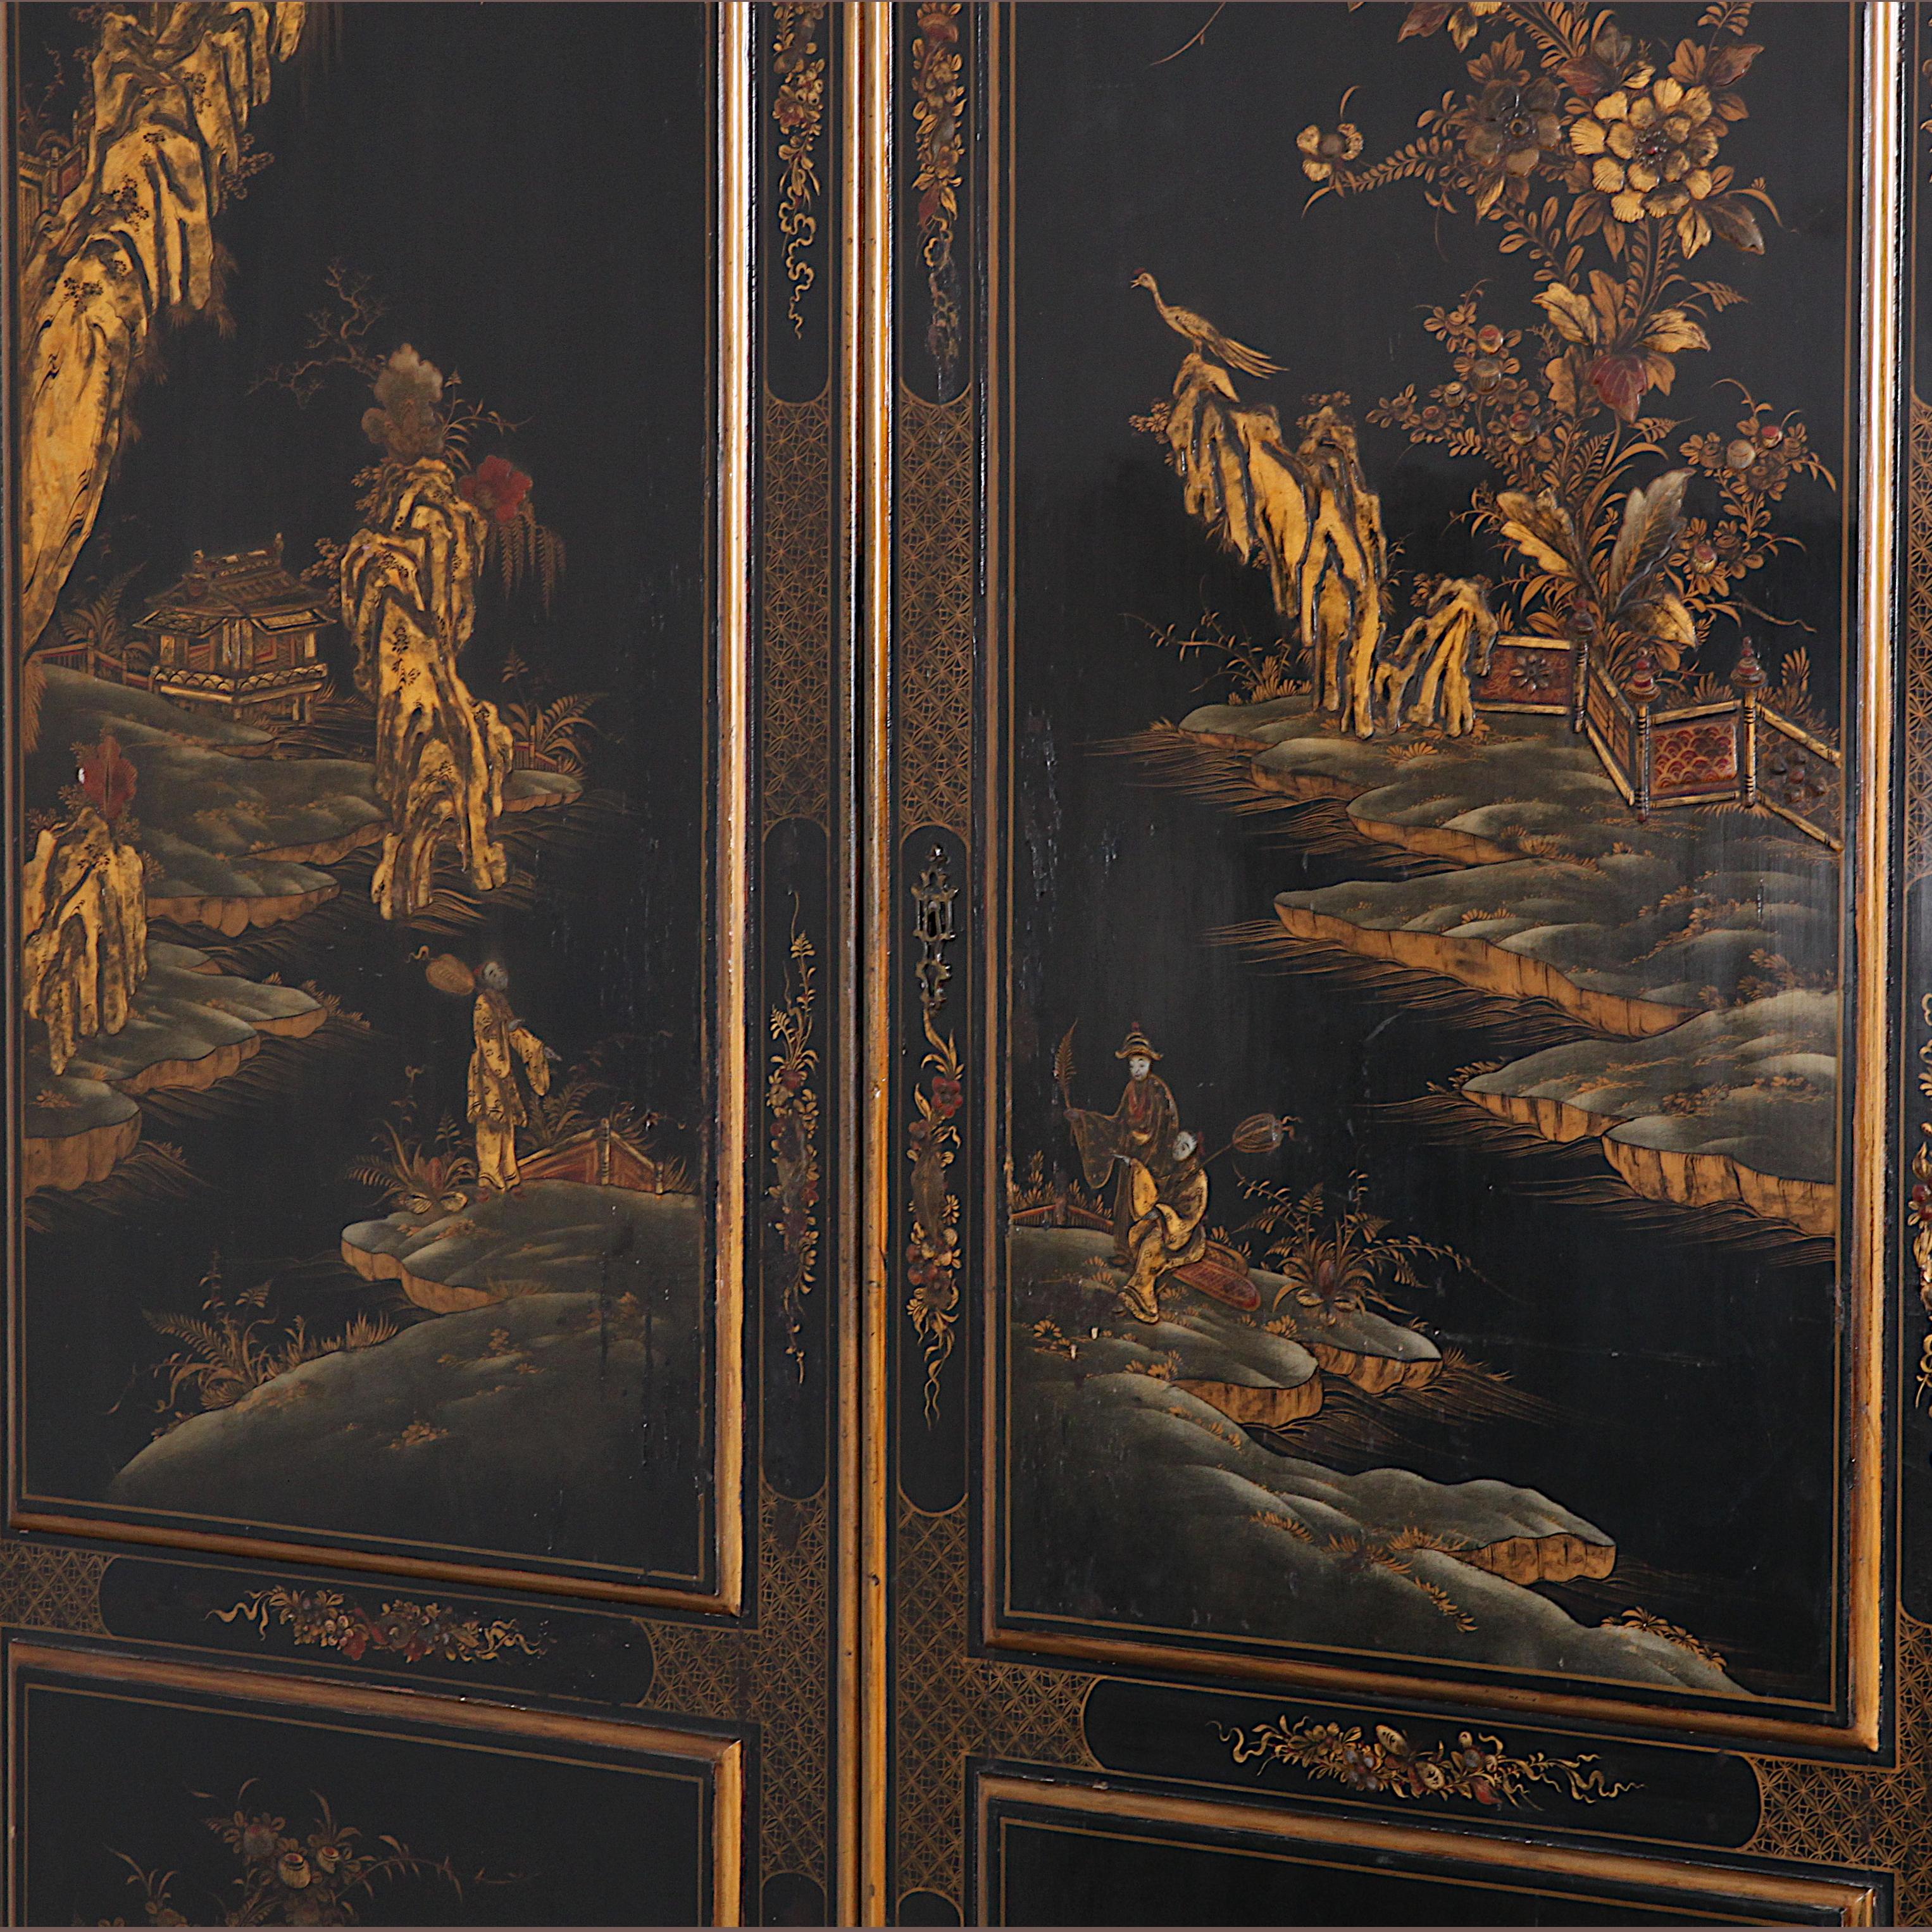 Black and gilt lacquered chinoiserie or ‘Japanned’ armoire with polychrome and gilt scenery of figures in various landscape settings. Beautifully detailed and a wonderful decorative piece in all settings.

Continental European made and decorated